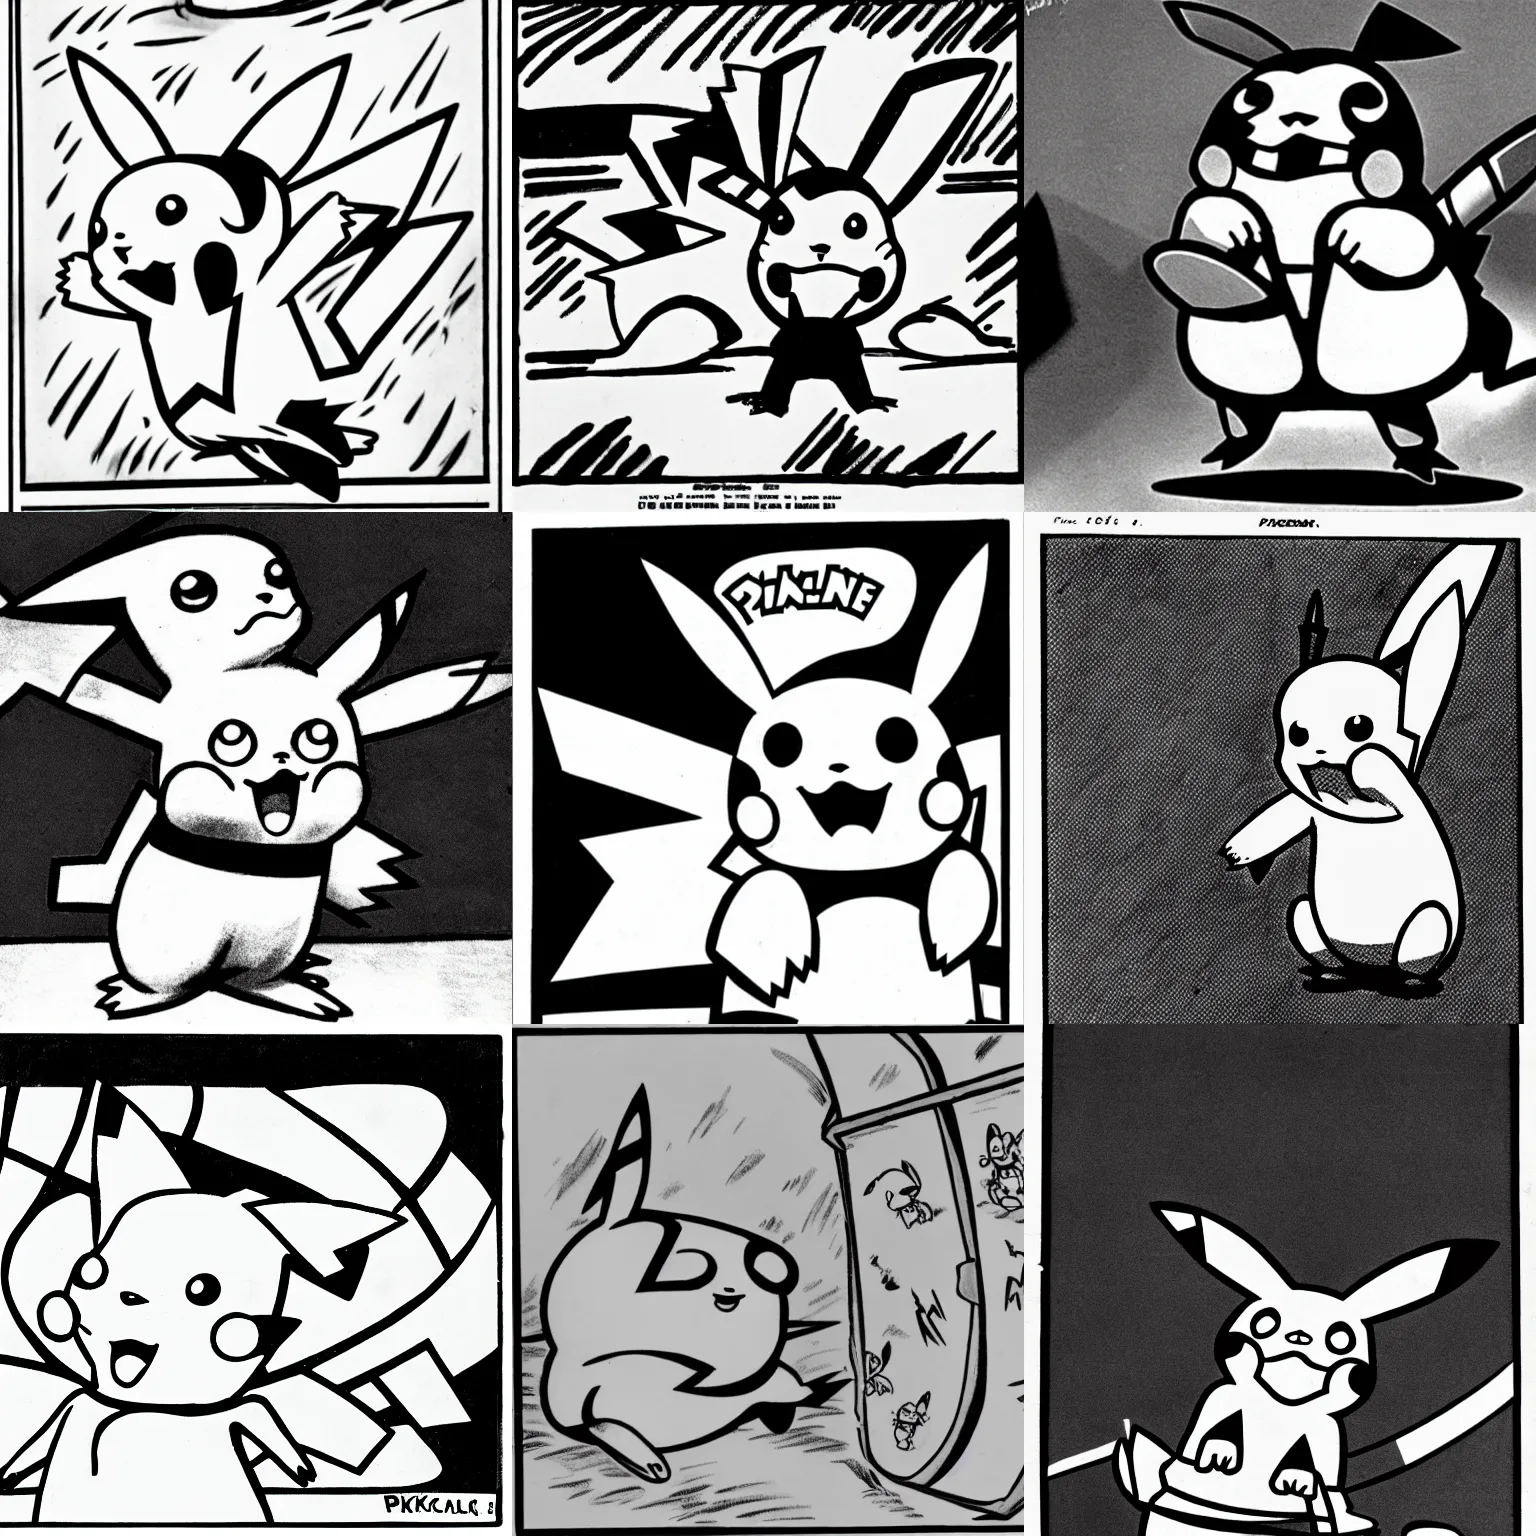 Prompt: pikachu in a black and white rubberhose - style cartoon from 1 9 3 9